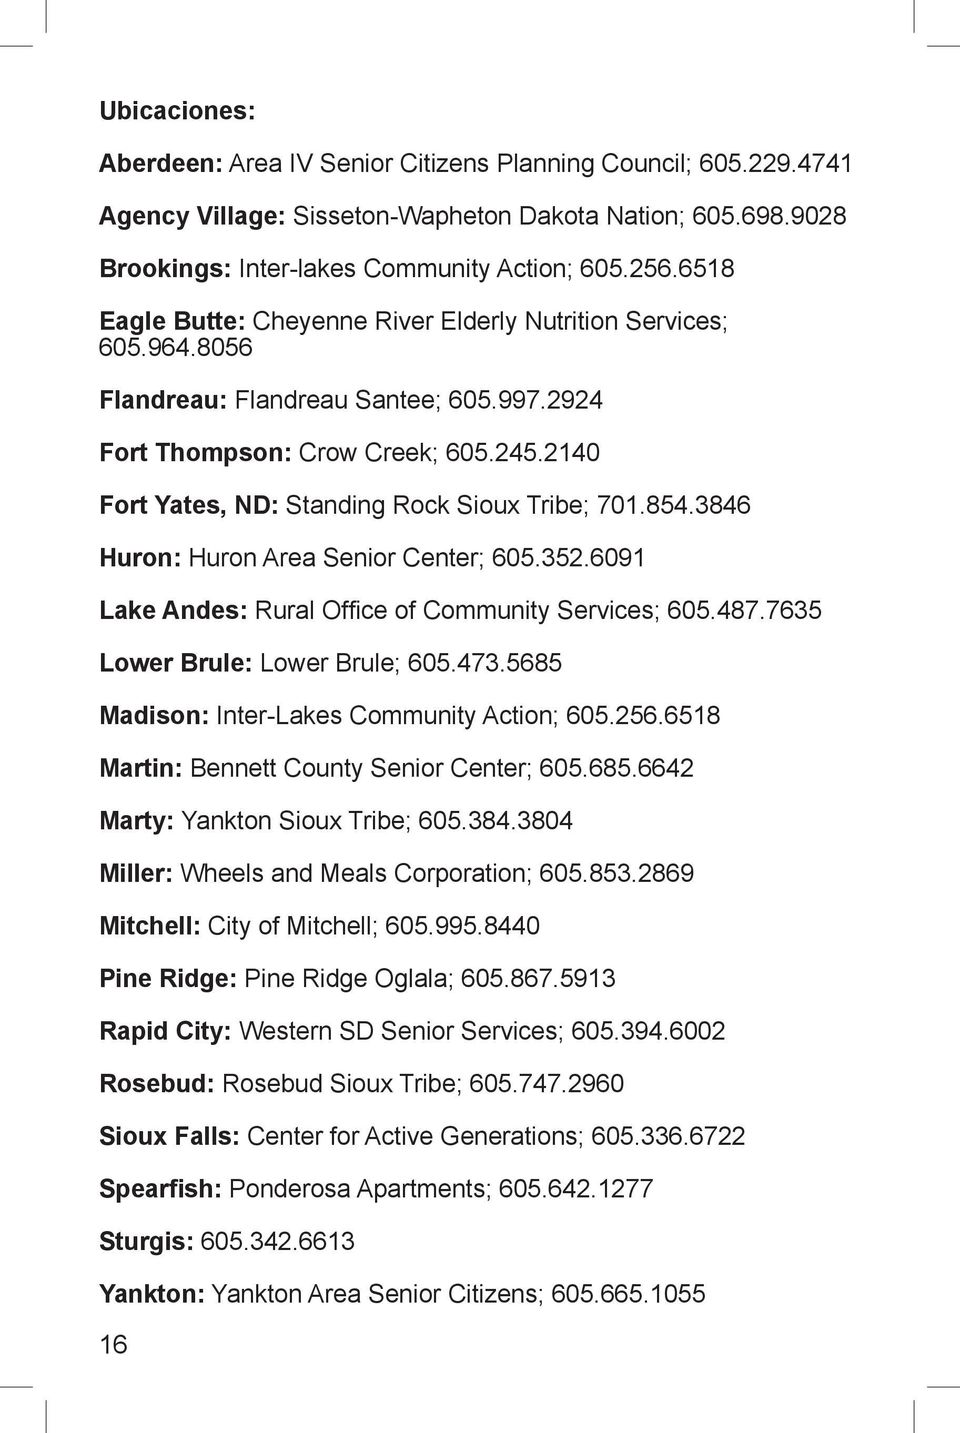 2140 Fort Yates, ND: Standing Rock Sioux Tribe; 701.854.3846 Huron: Huron Area Senior Center; 605.352.6091 Lake Andes: Rural Office of Community Services; 605.487.7635 Lower Brule: Lower Brule; 605.